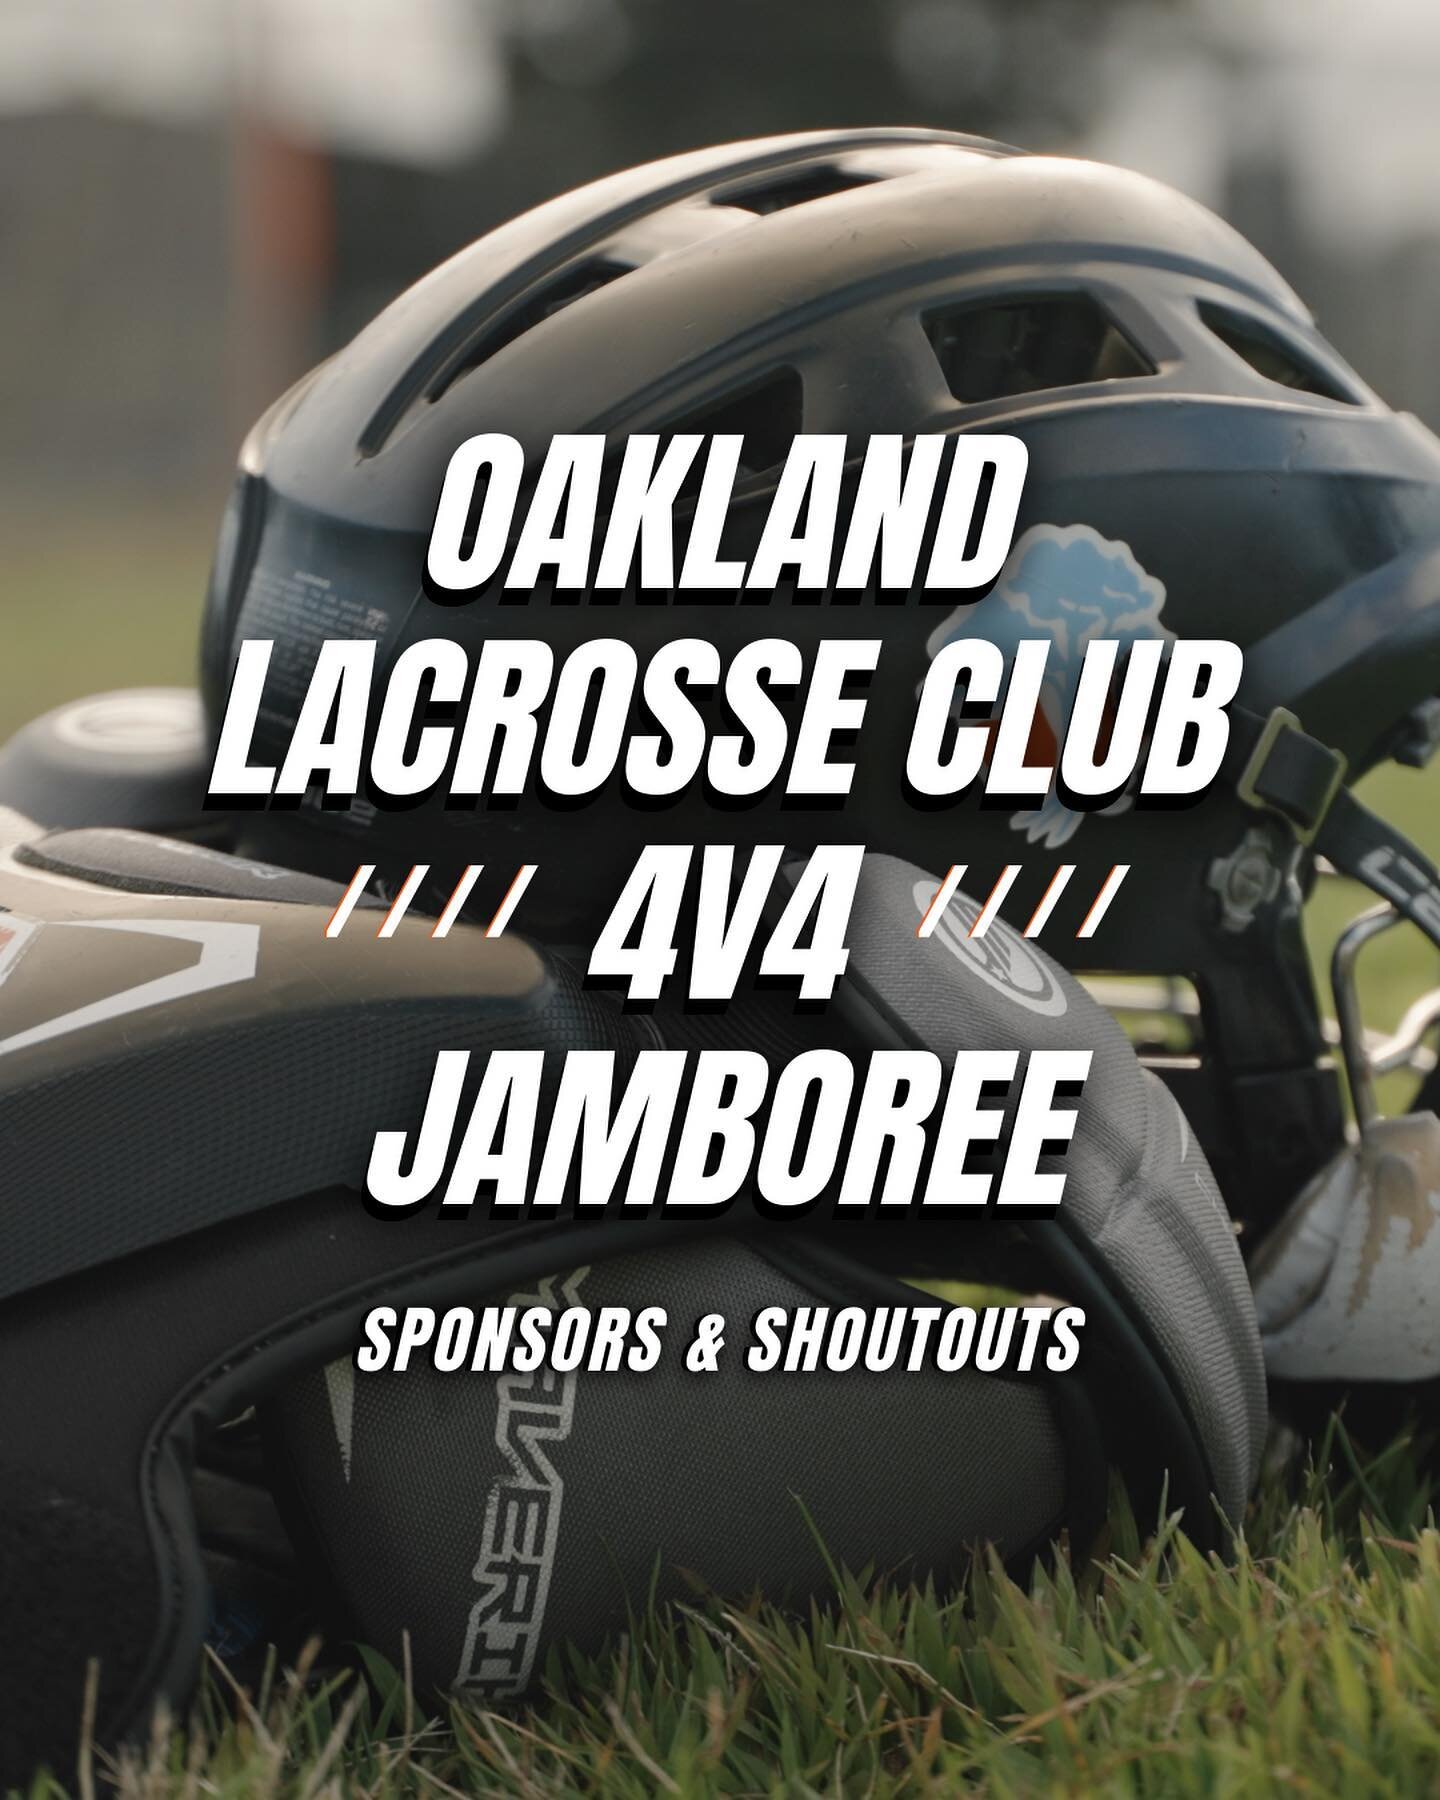 With much gratitude we give two claps for our sponsors, high school council, jamboree board, artists, and vendors for bringing the third annual OLC 4v4 Jamboree to life.🎉
&bull;
We are excited to see the Bay Area Lacrosse Community gather at Laney C